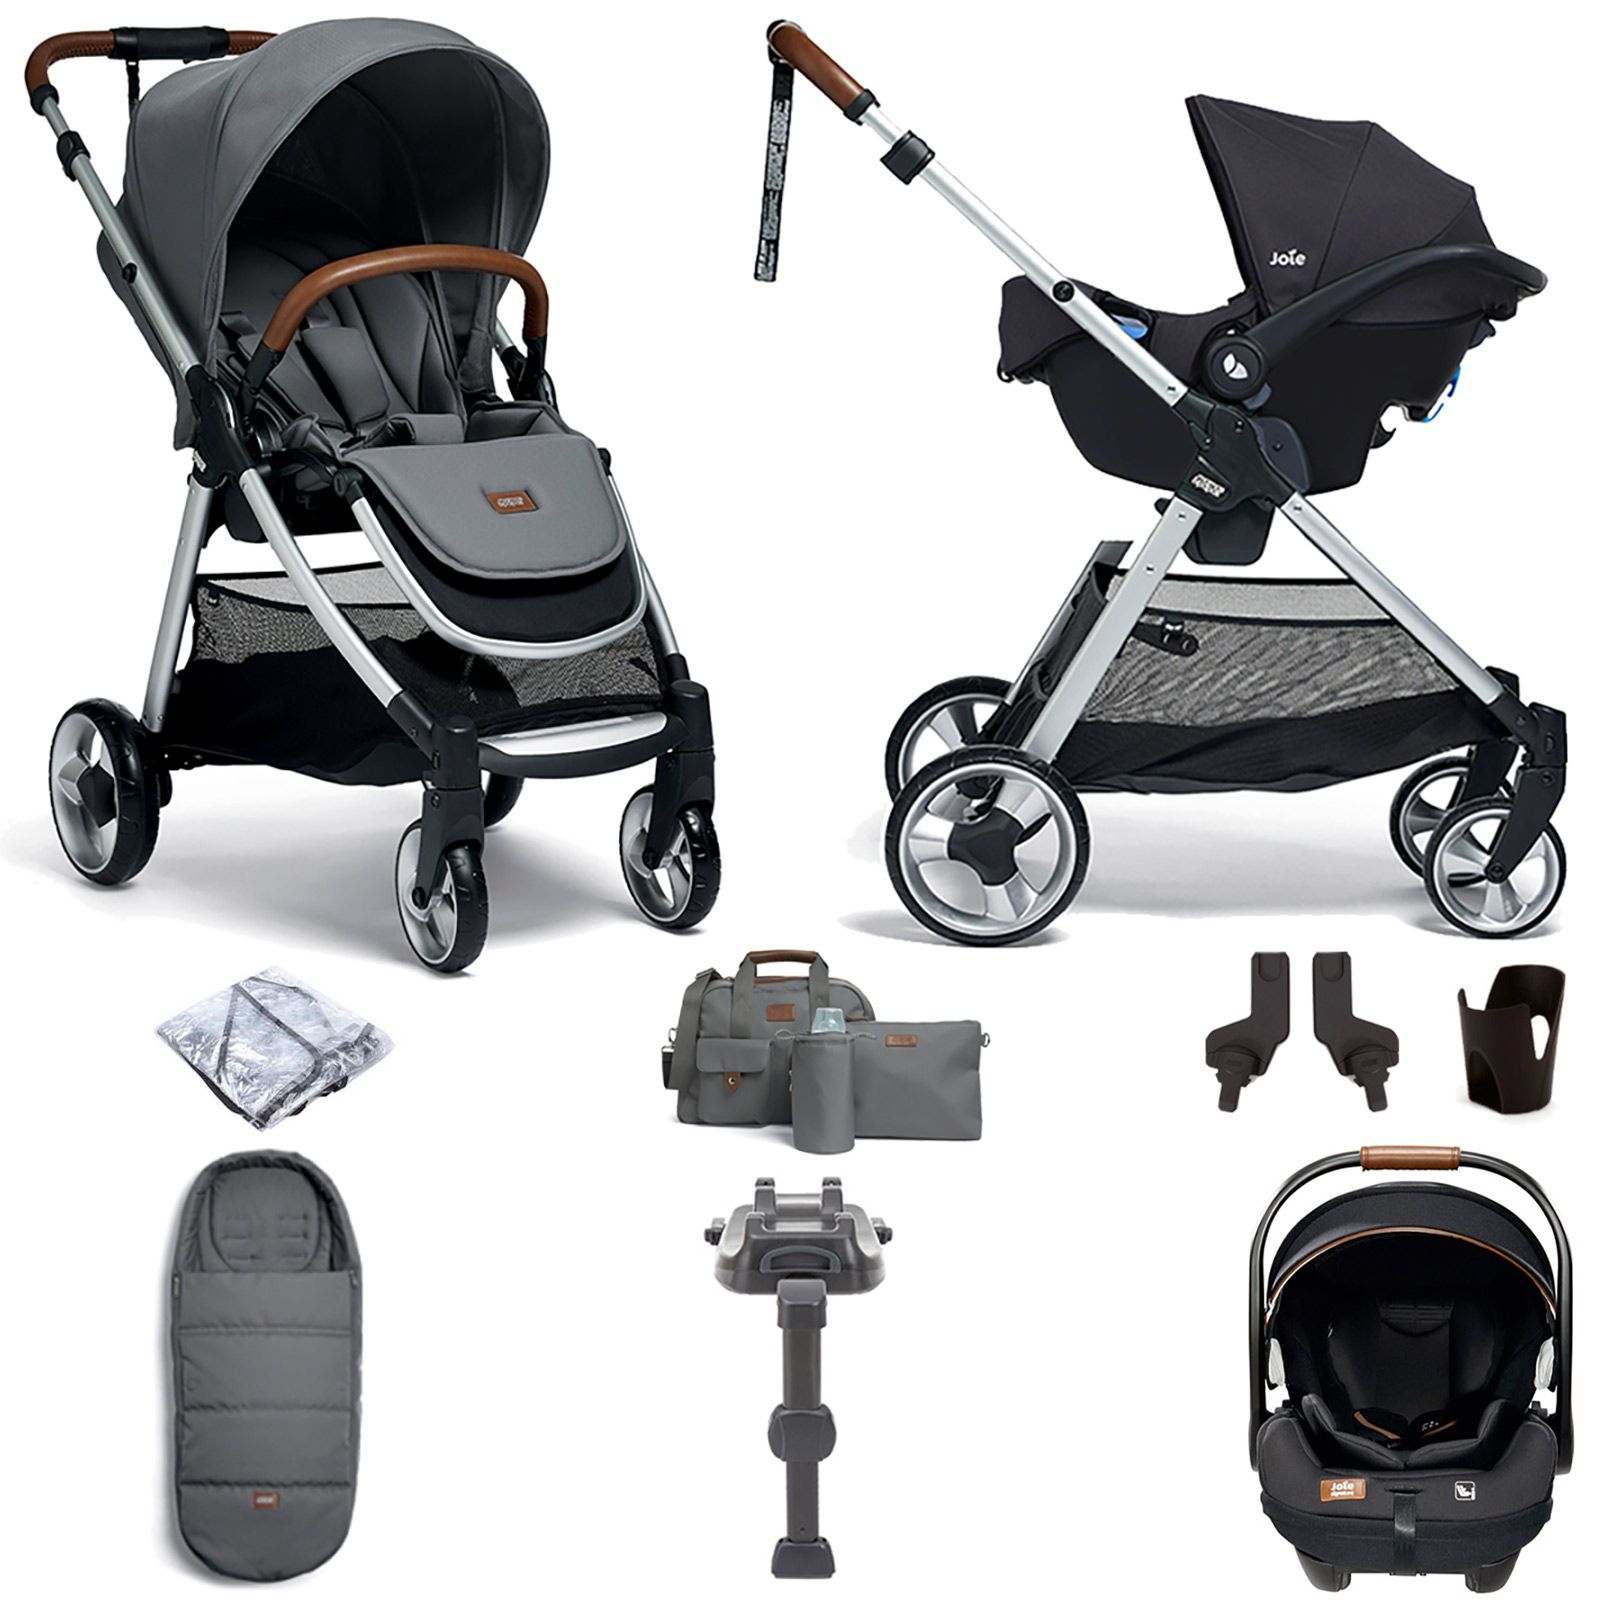 Mamas & Papas Flip XT2 Travel System with Accessories, i-Level Recline Car Seat & i-Base LX 2 - Fossil Grey